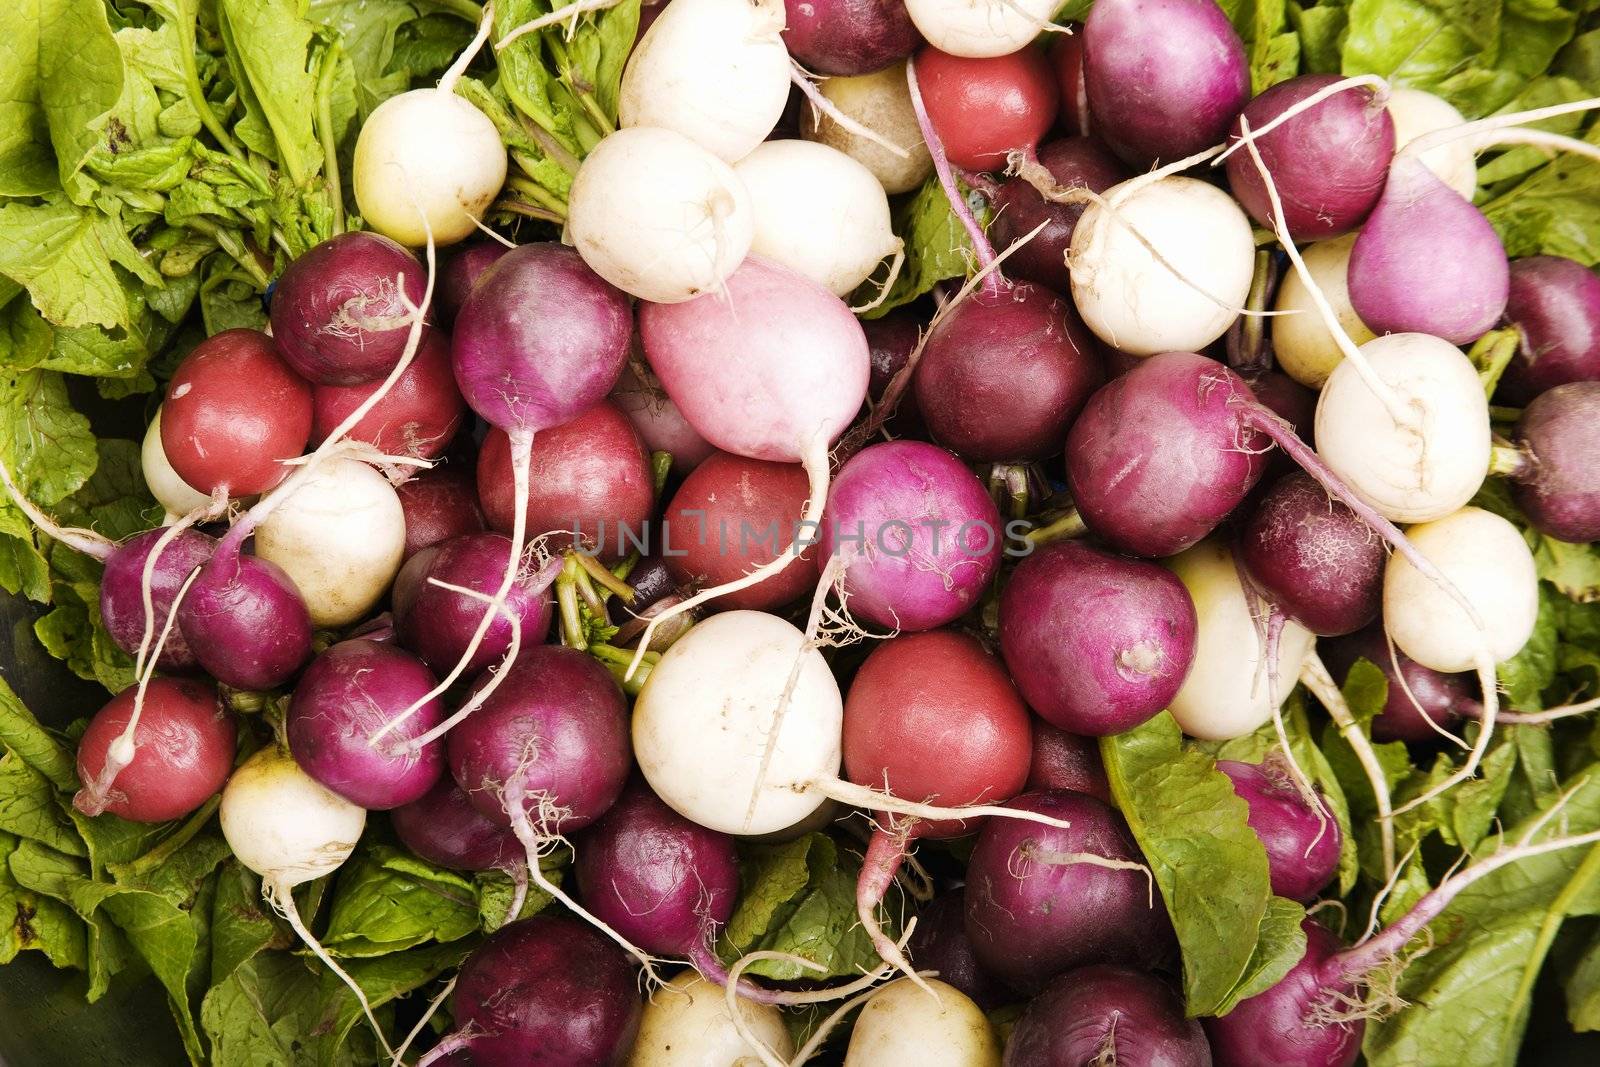 Red, white and magenta radishes on a bed of leafy greens